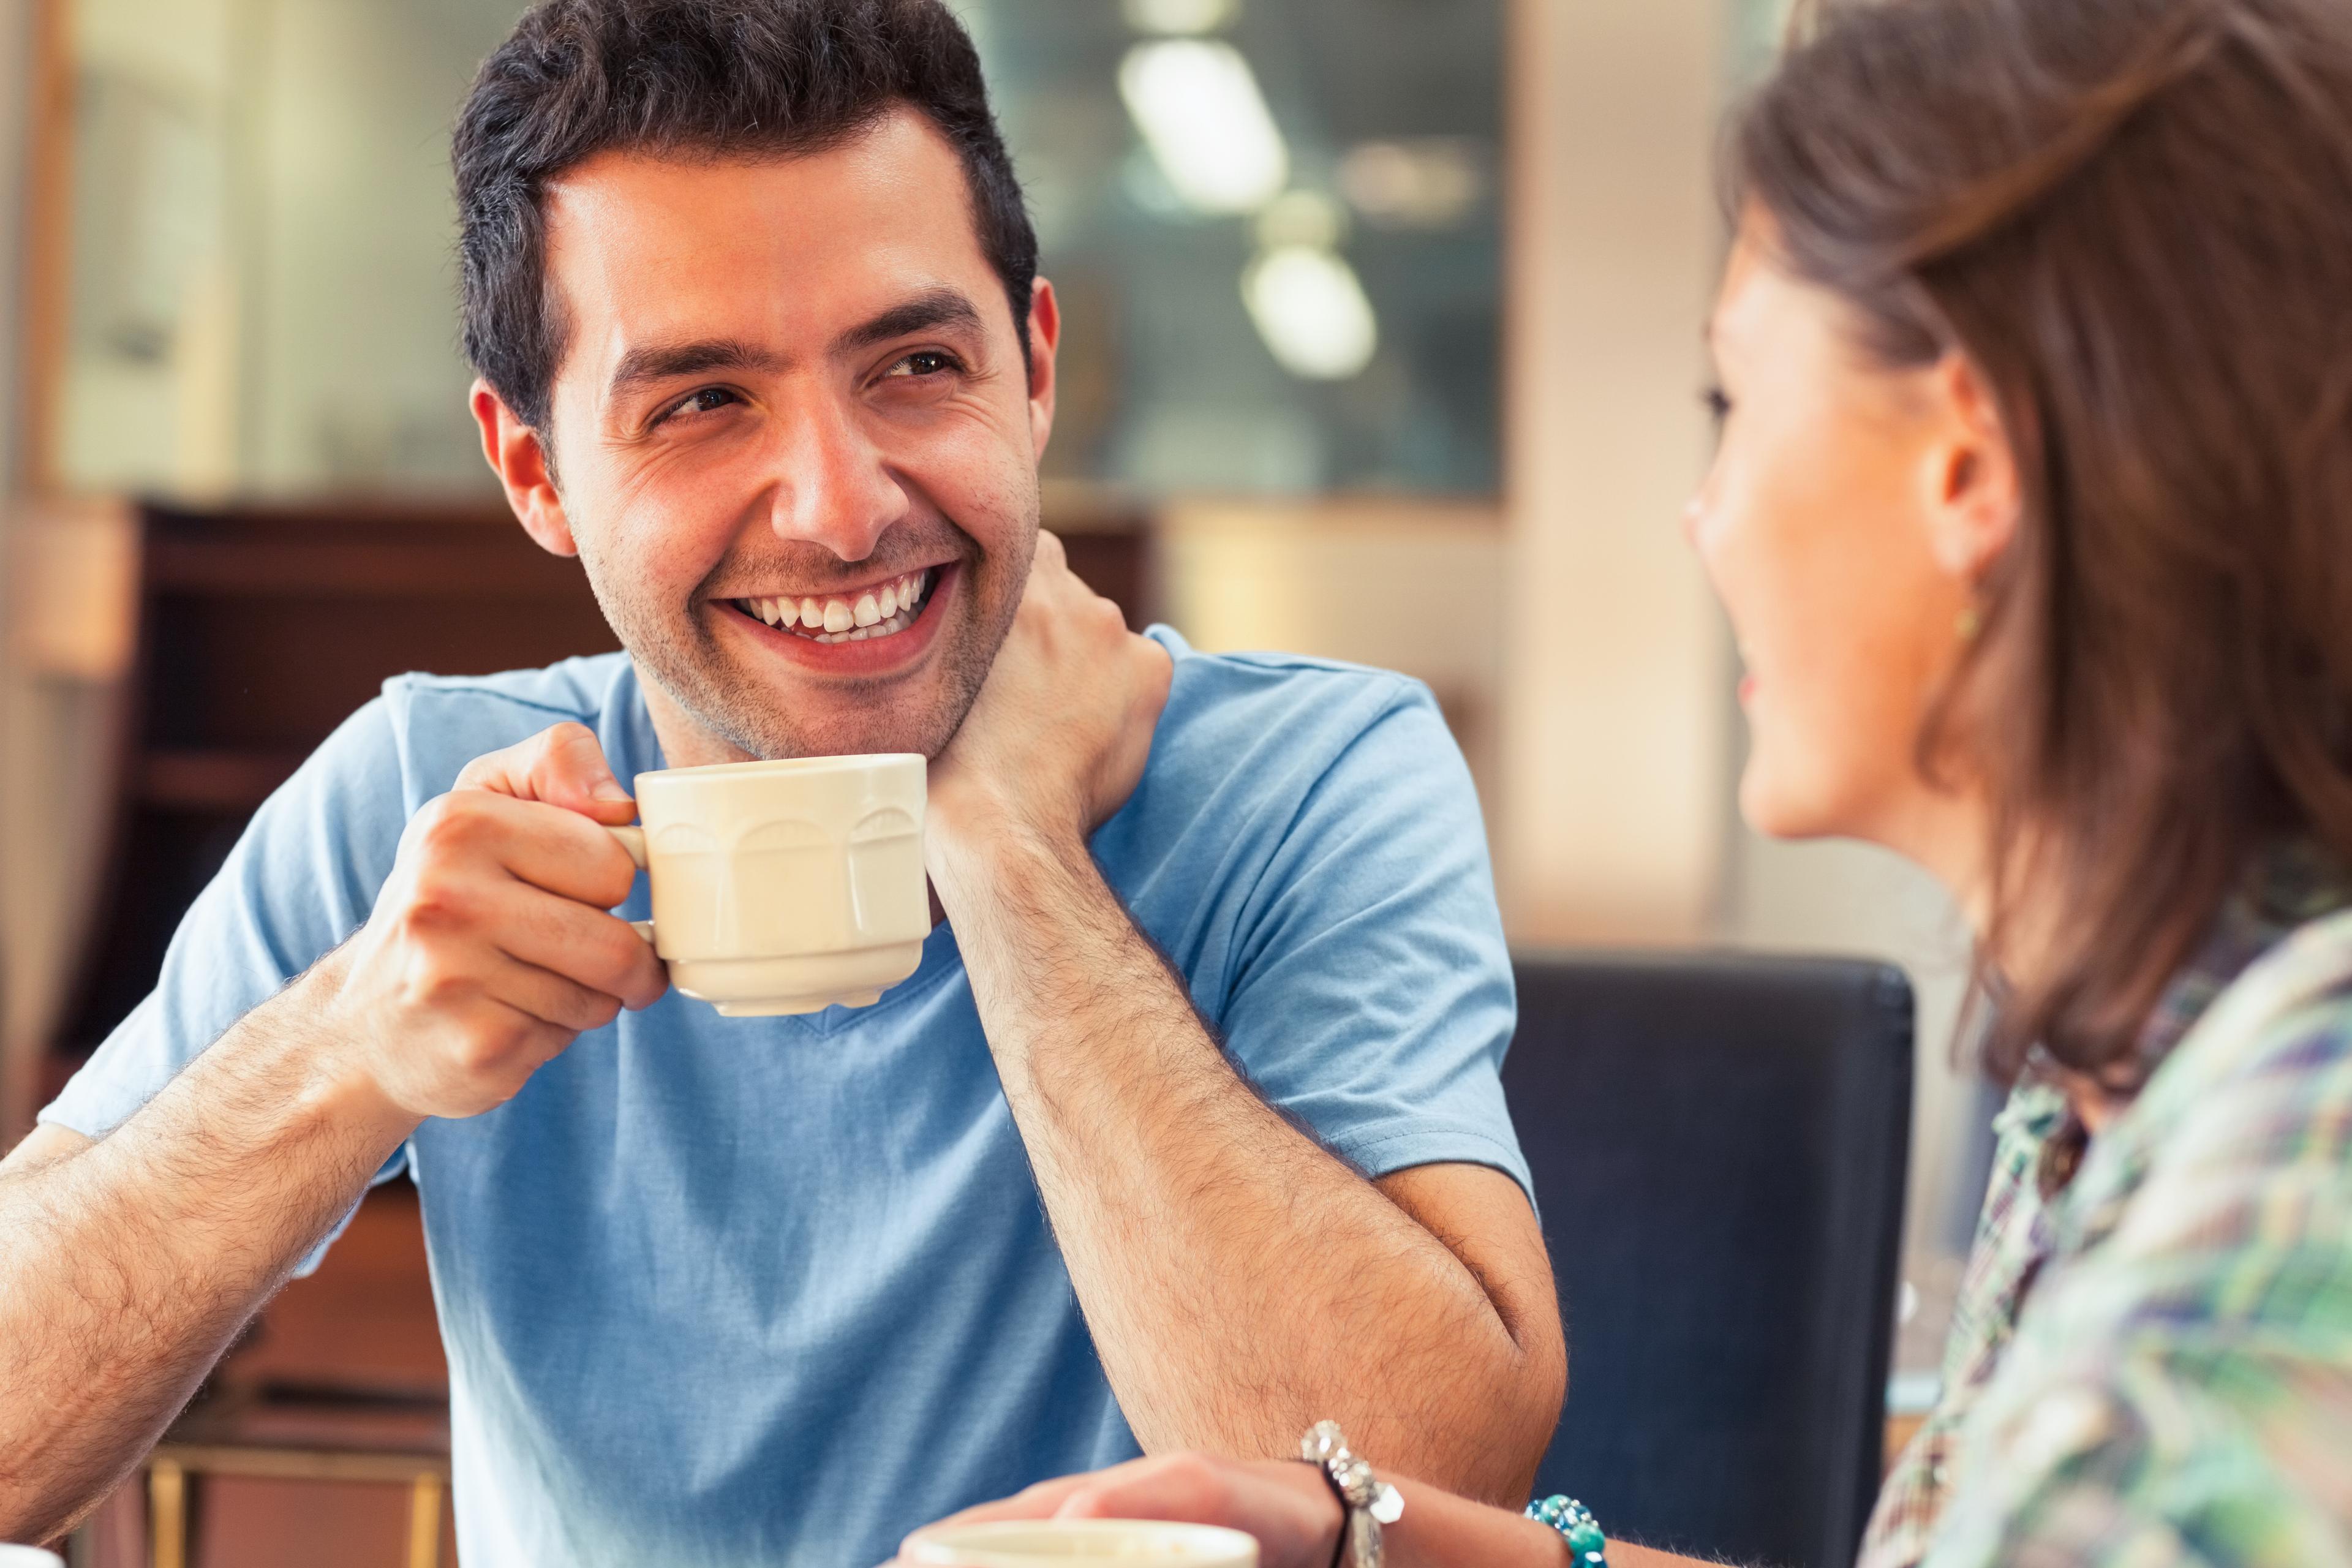 A man is holding a coffee mug up as he smiles at a woman who is talking to him